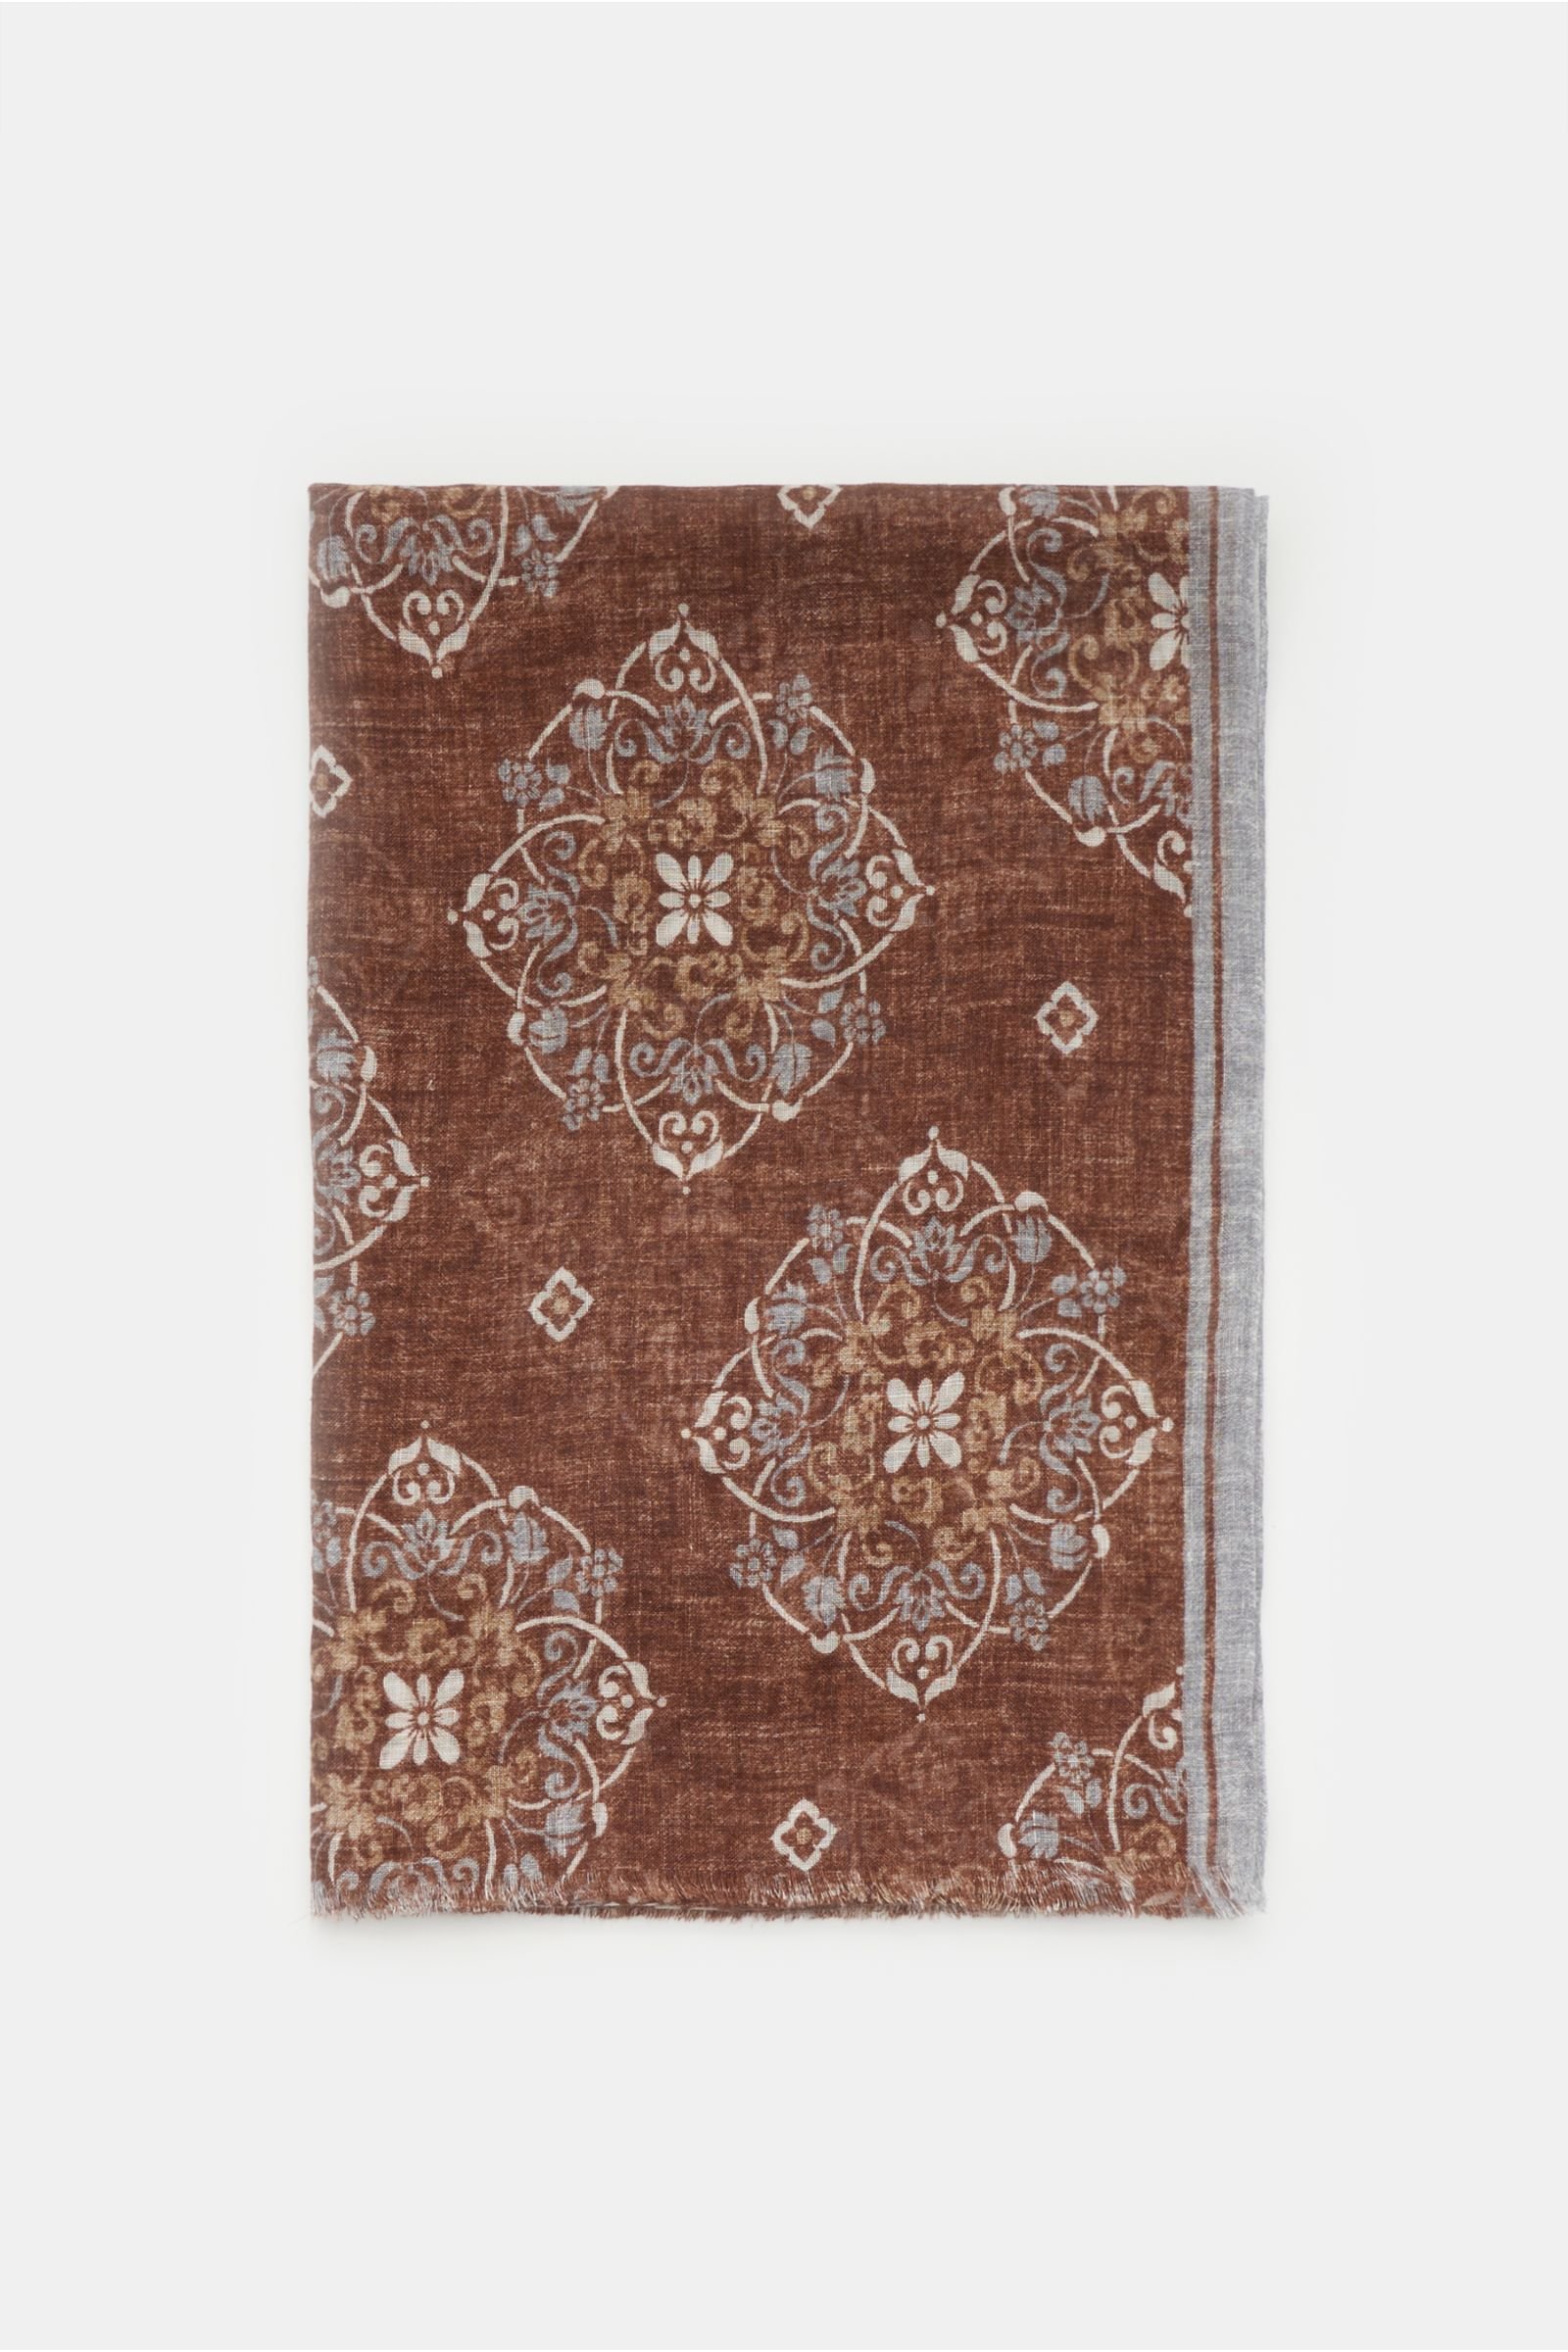 Linen scarf 'Giglio' brown/light grey patterned